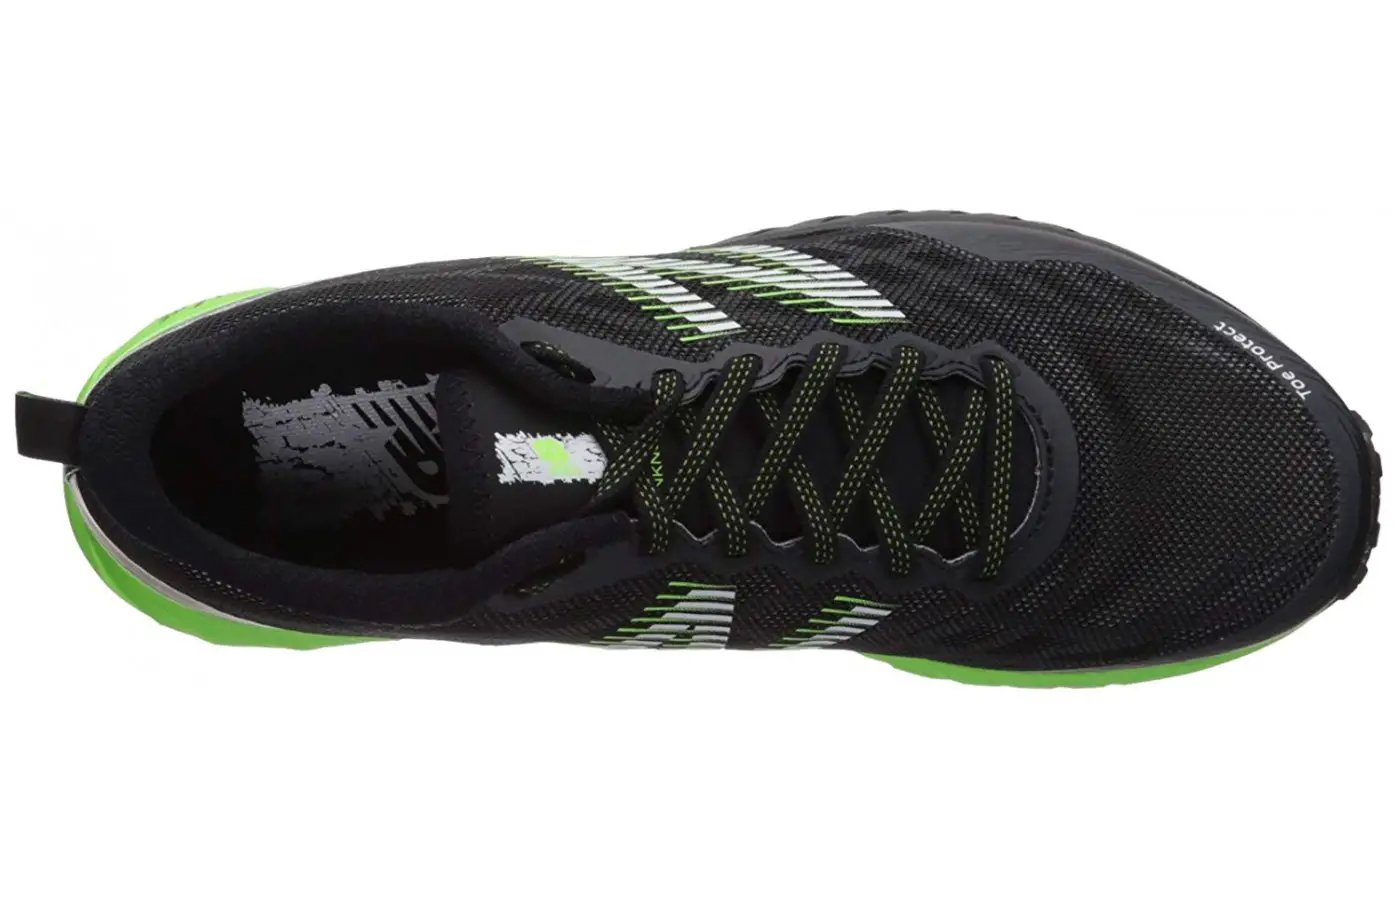 The midsole is made out of REVlite foam.